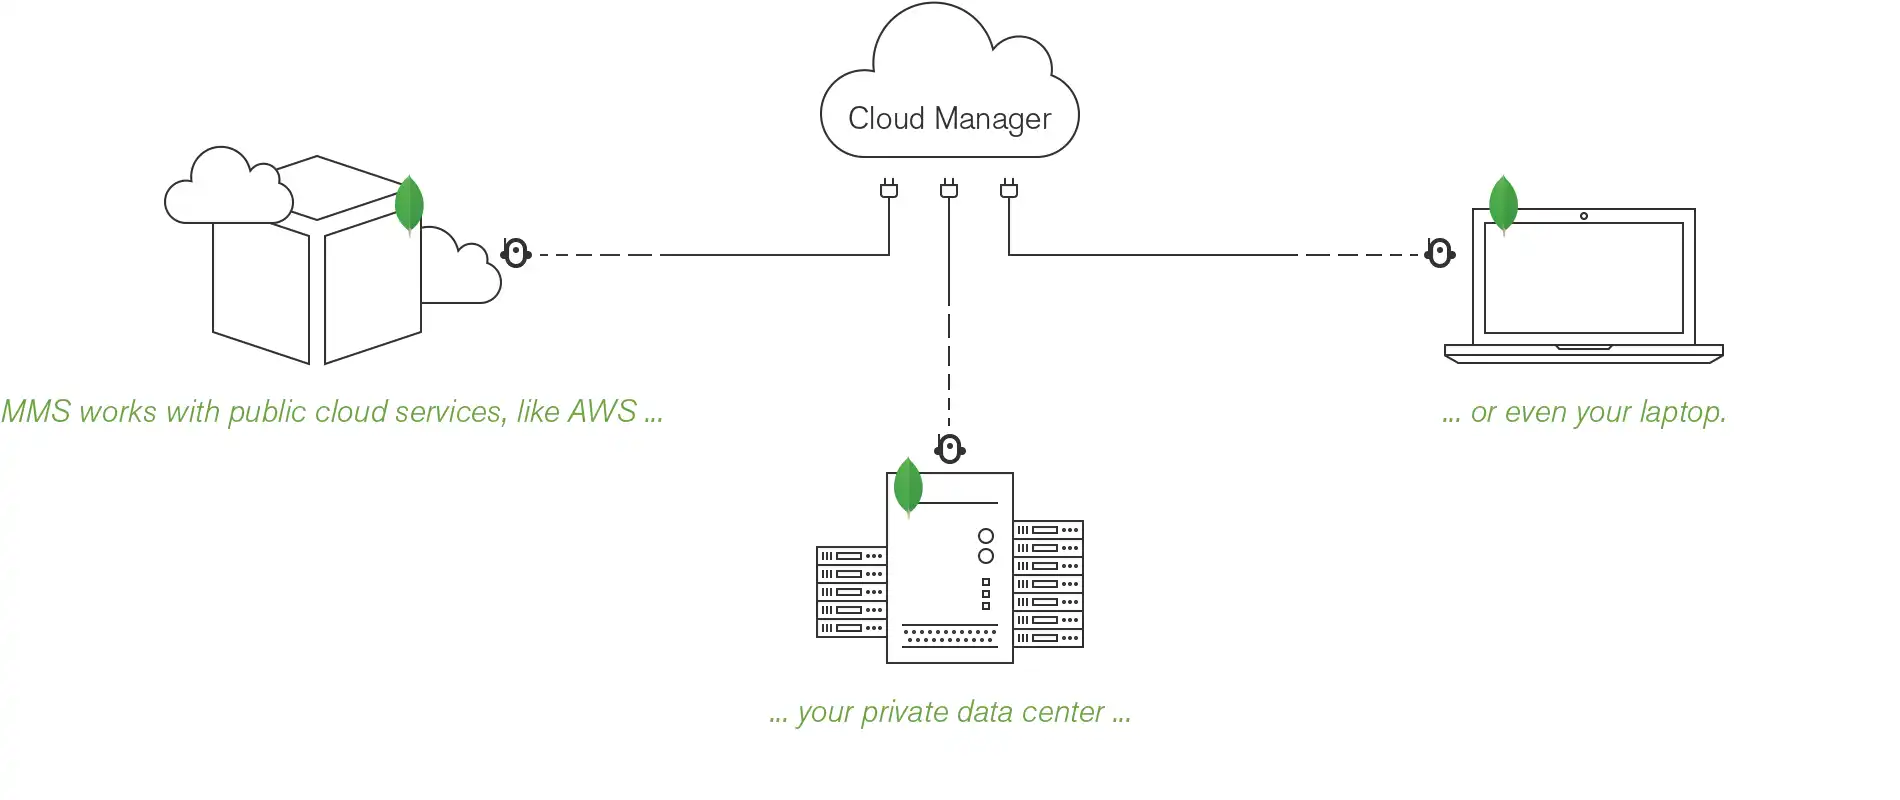 "Automation coordinates MongoDB instances running in a public cloud, in your private data center, or on your local system."